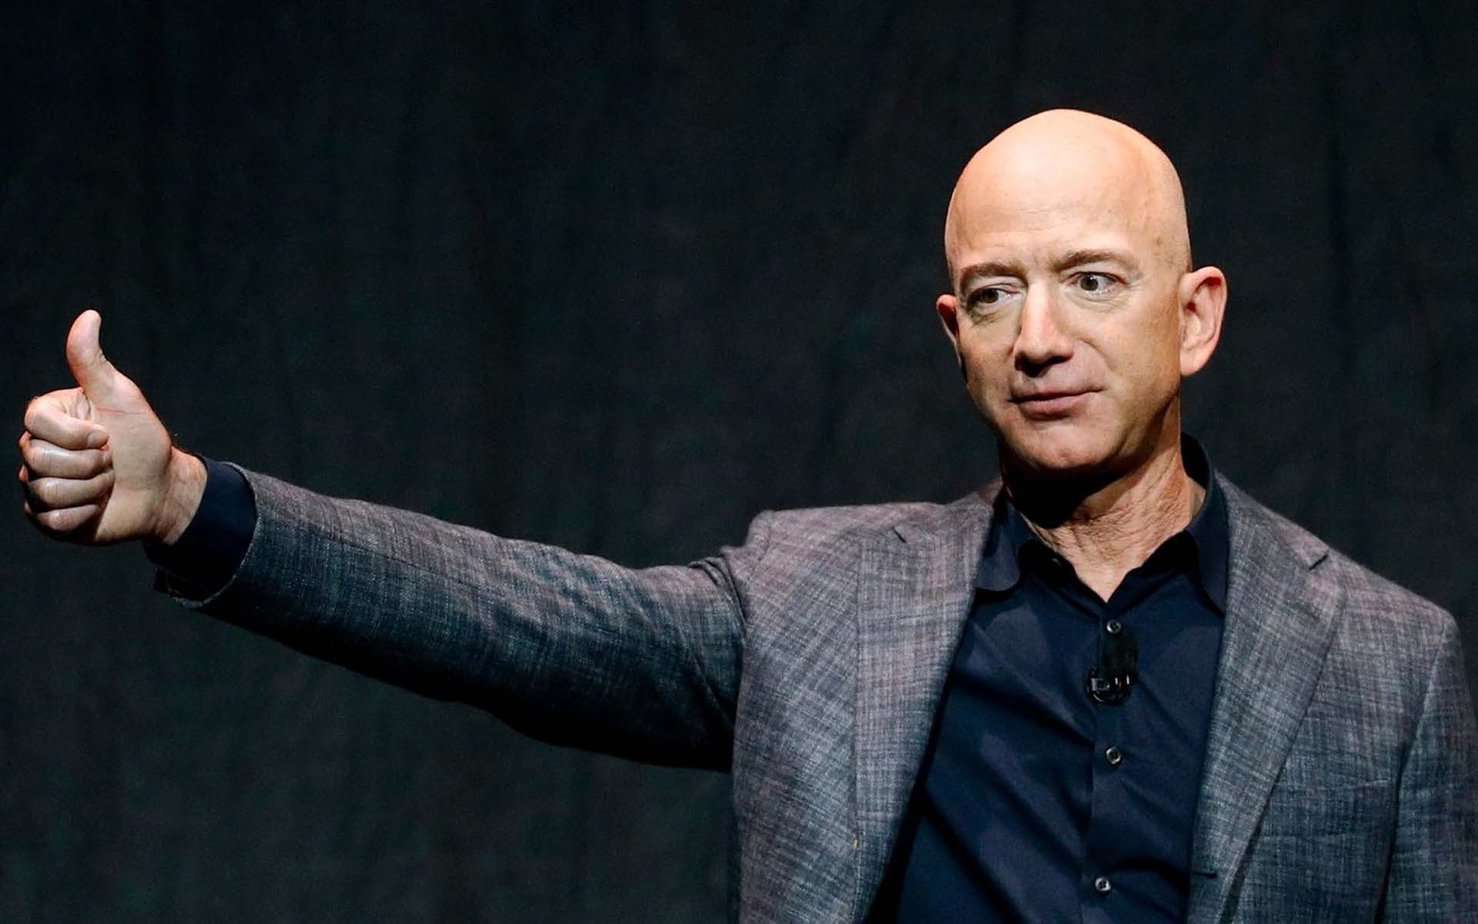 On Prime Day New Yorkers Tell Jeff Bezos To Do Better